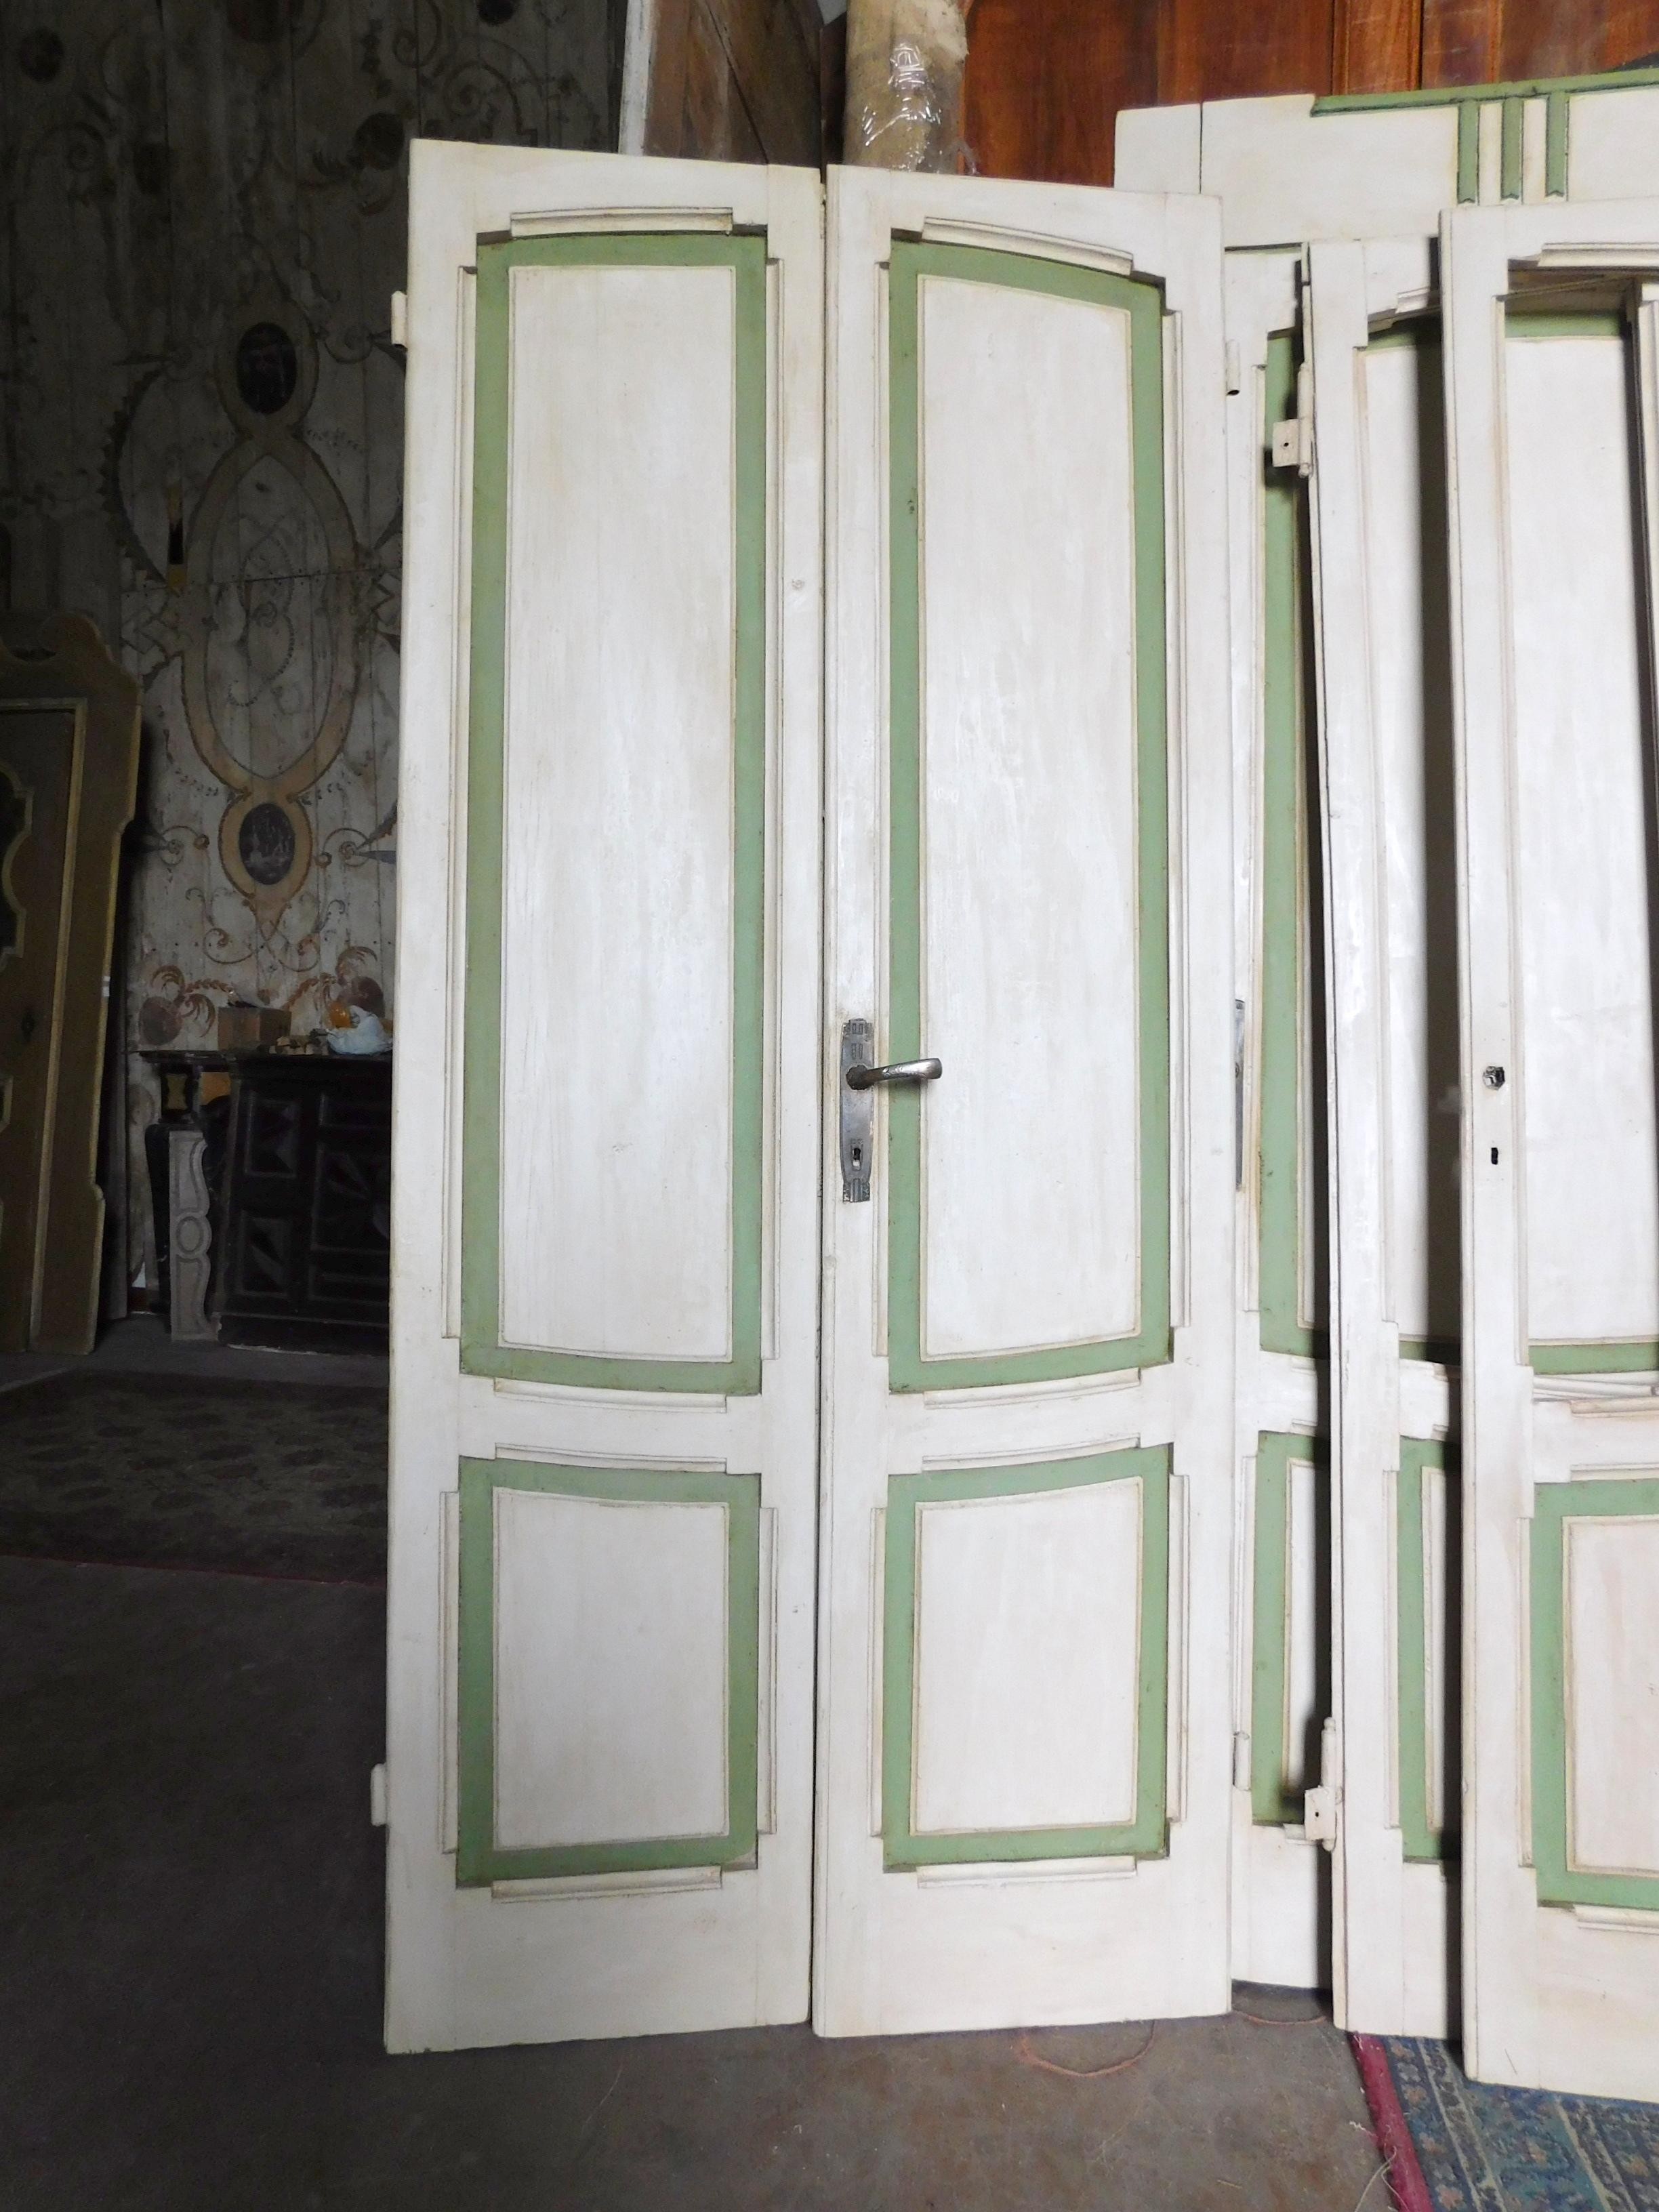 Set of 4 Deco Lacquered Doors, White / Green, Different Size, Milan 1920 For Sale 3